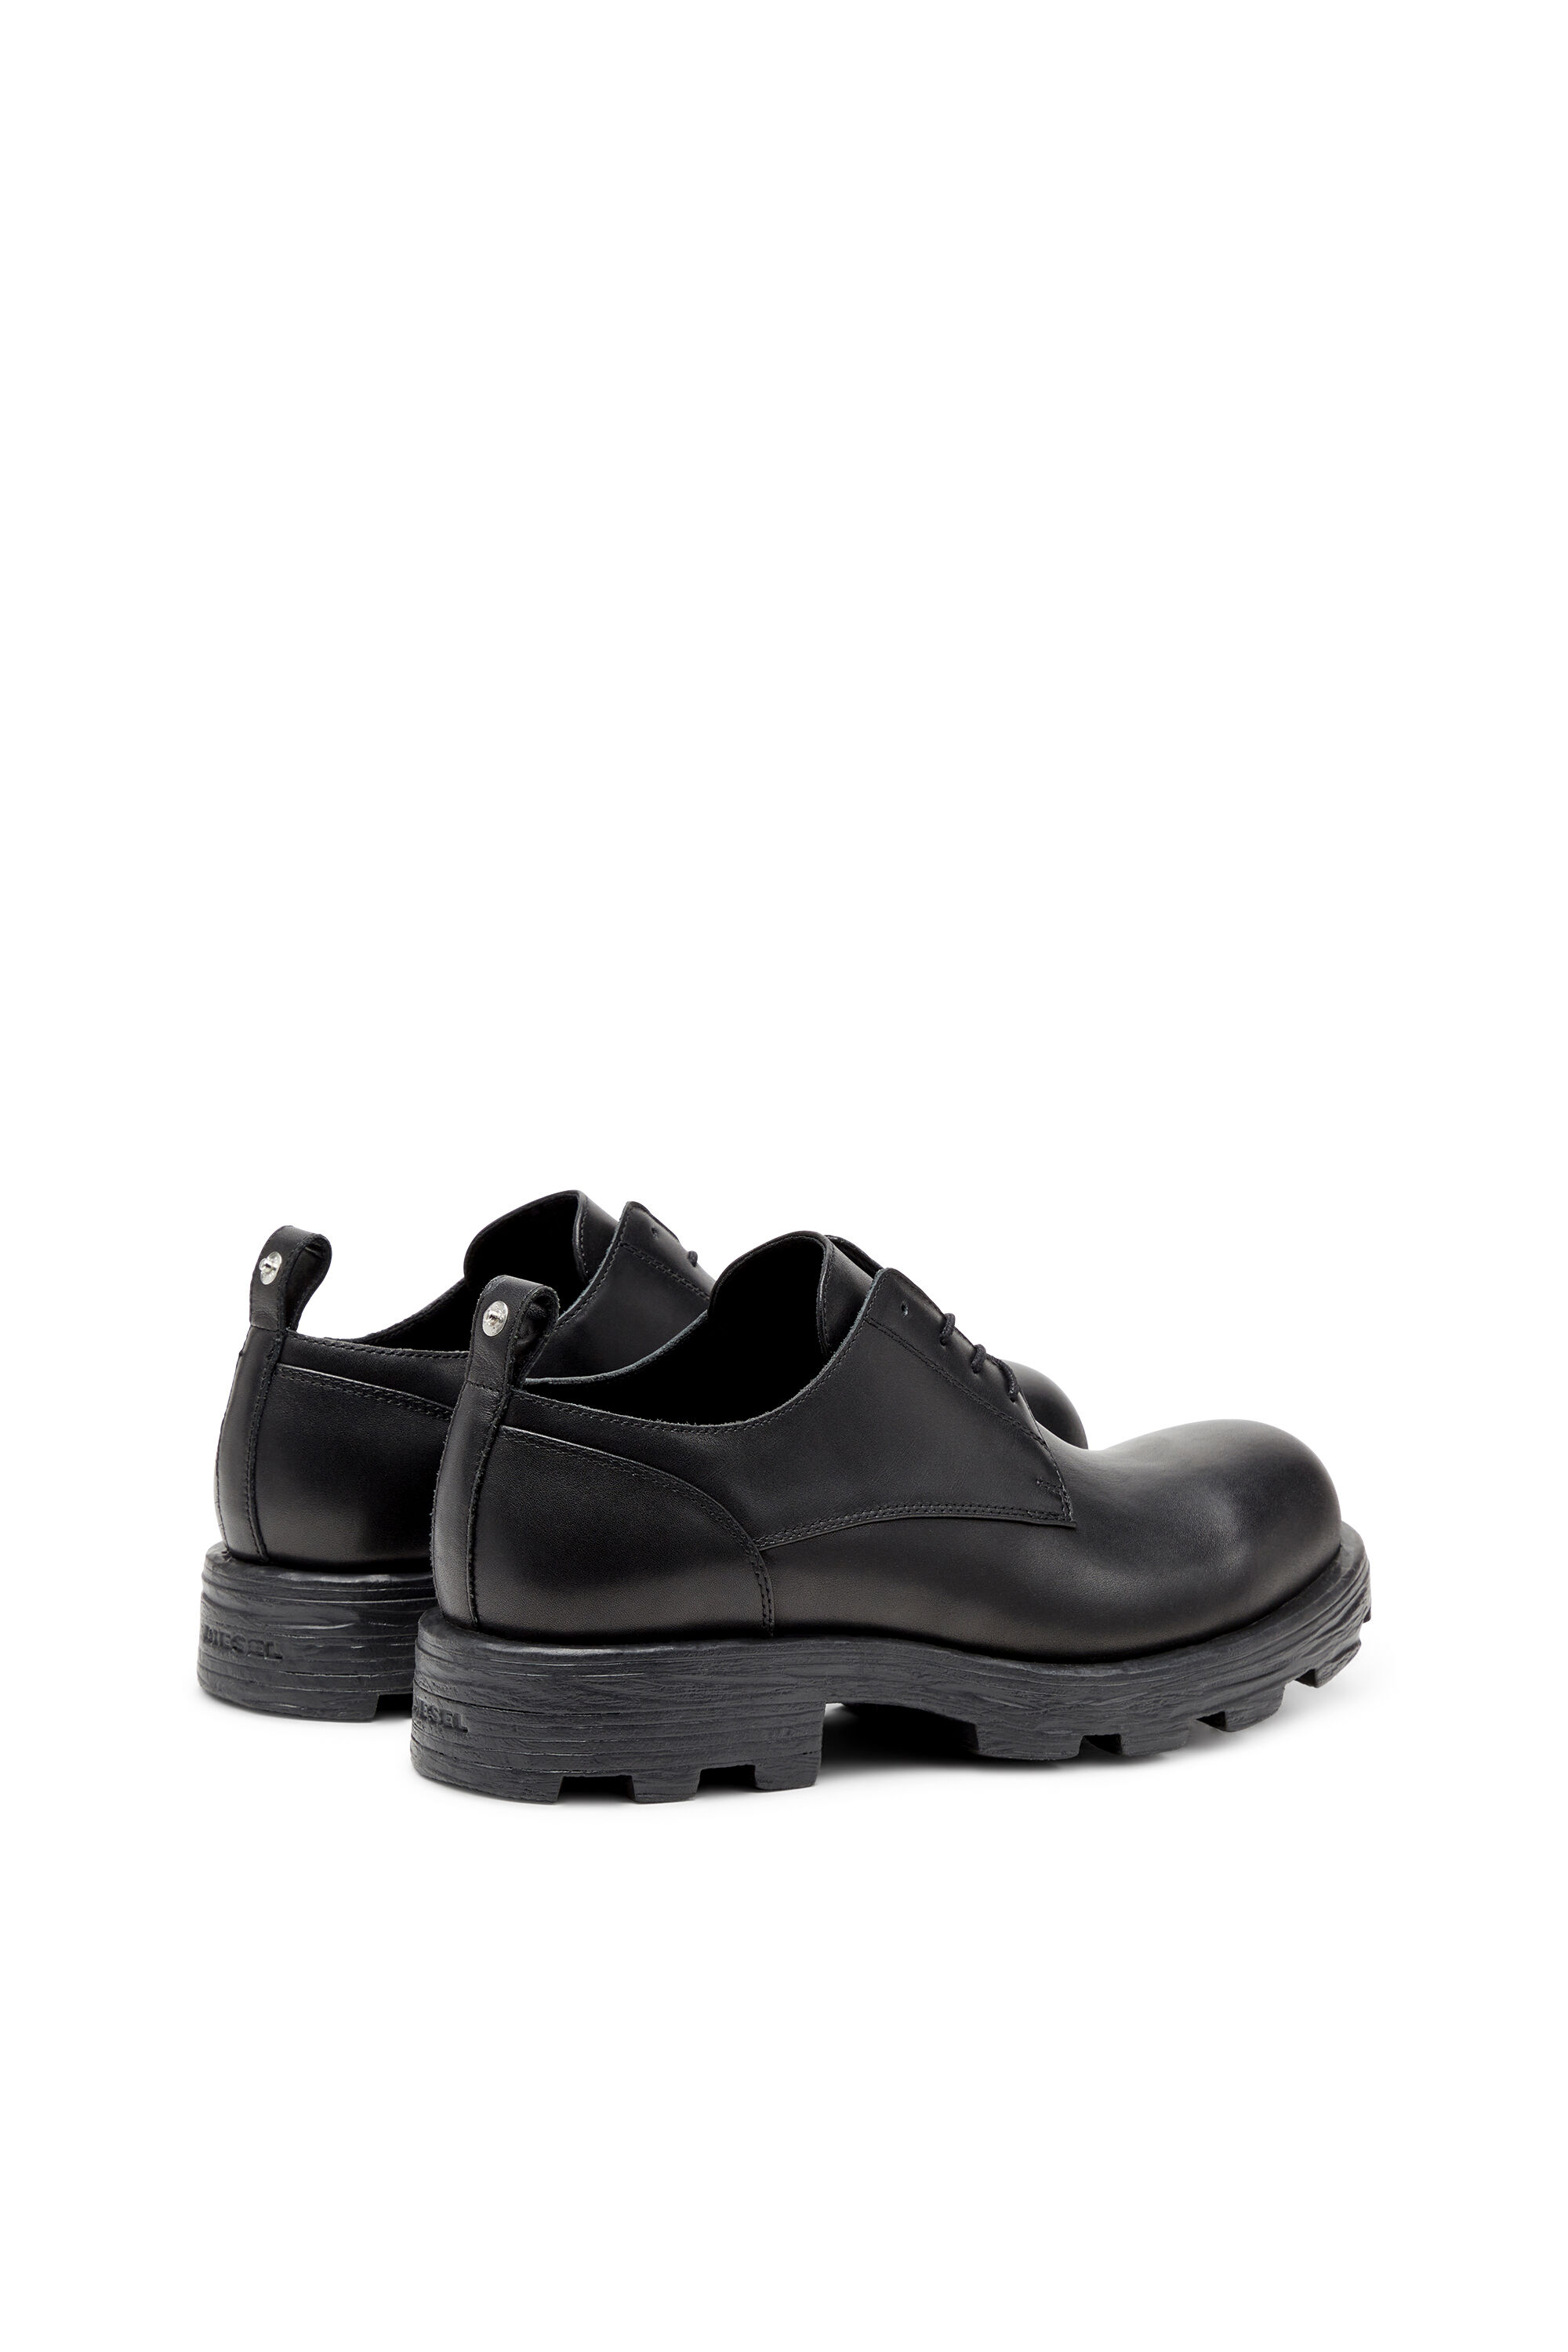 Diesel - D-HAMMER SH, Man D-Hammer-Derby shoes in textured leather in Black - Image 3